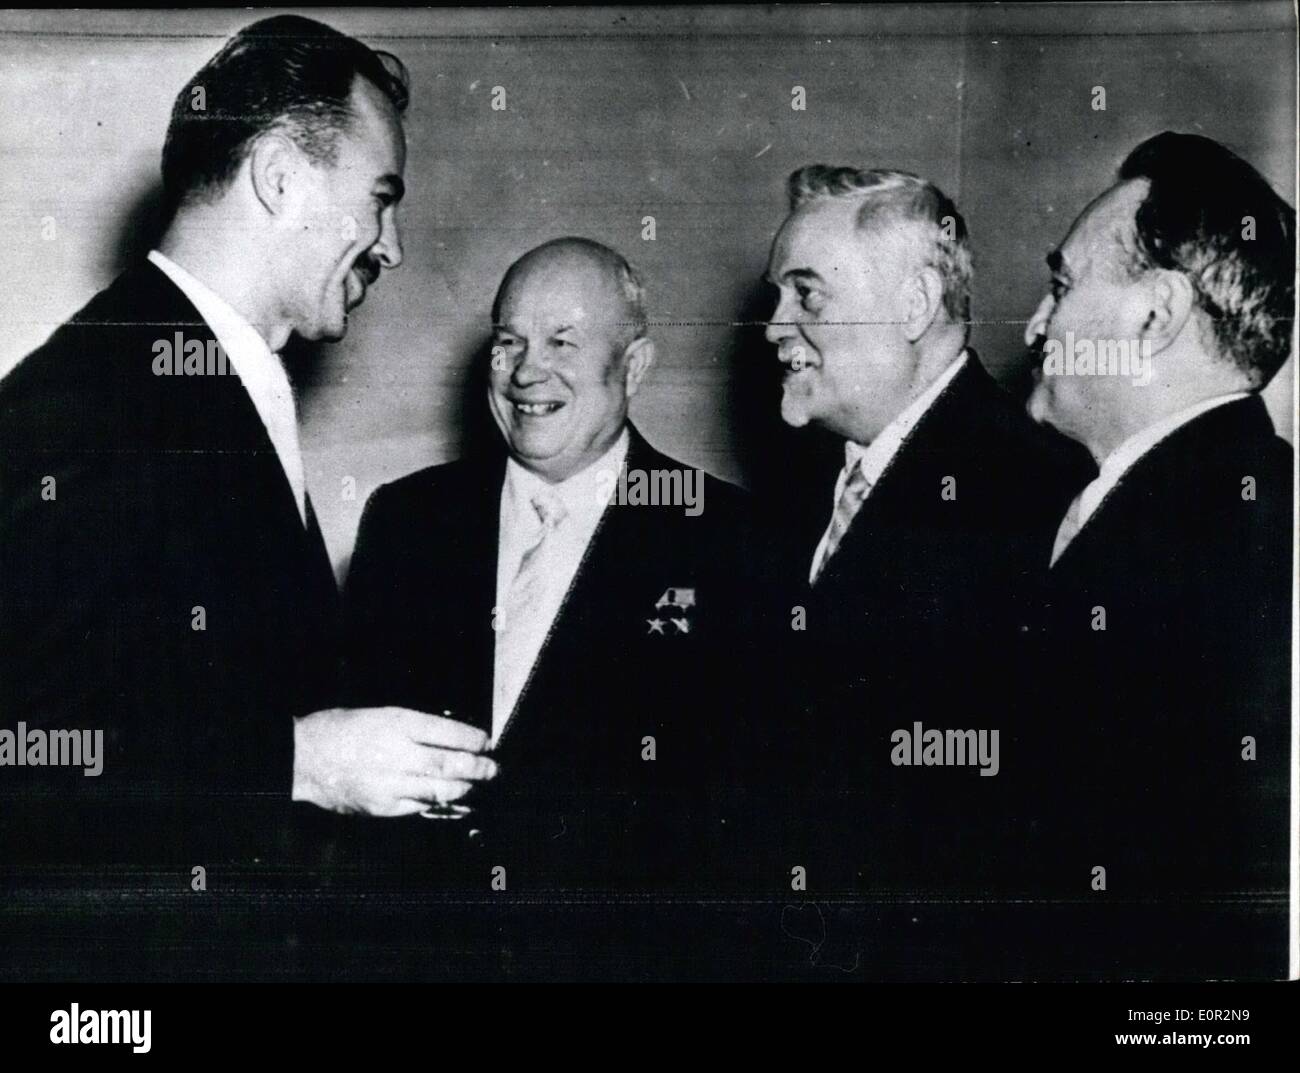 Dec. 12, 1957 - With a winning smile greeted leading Soviet statesman, Chrustochov, Bulganin and Mikojan the Yugoslavian Ambassador to the Soviet Union, Velko Mikunovic, who gave a reception on the occasion of the 12th anniversary of the People's Republic if Yugoslavia. Photo shows left to right: Velko Mikunovic, Chrustchov, Bulganin and Mikojan during the reception. Stock Photo